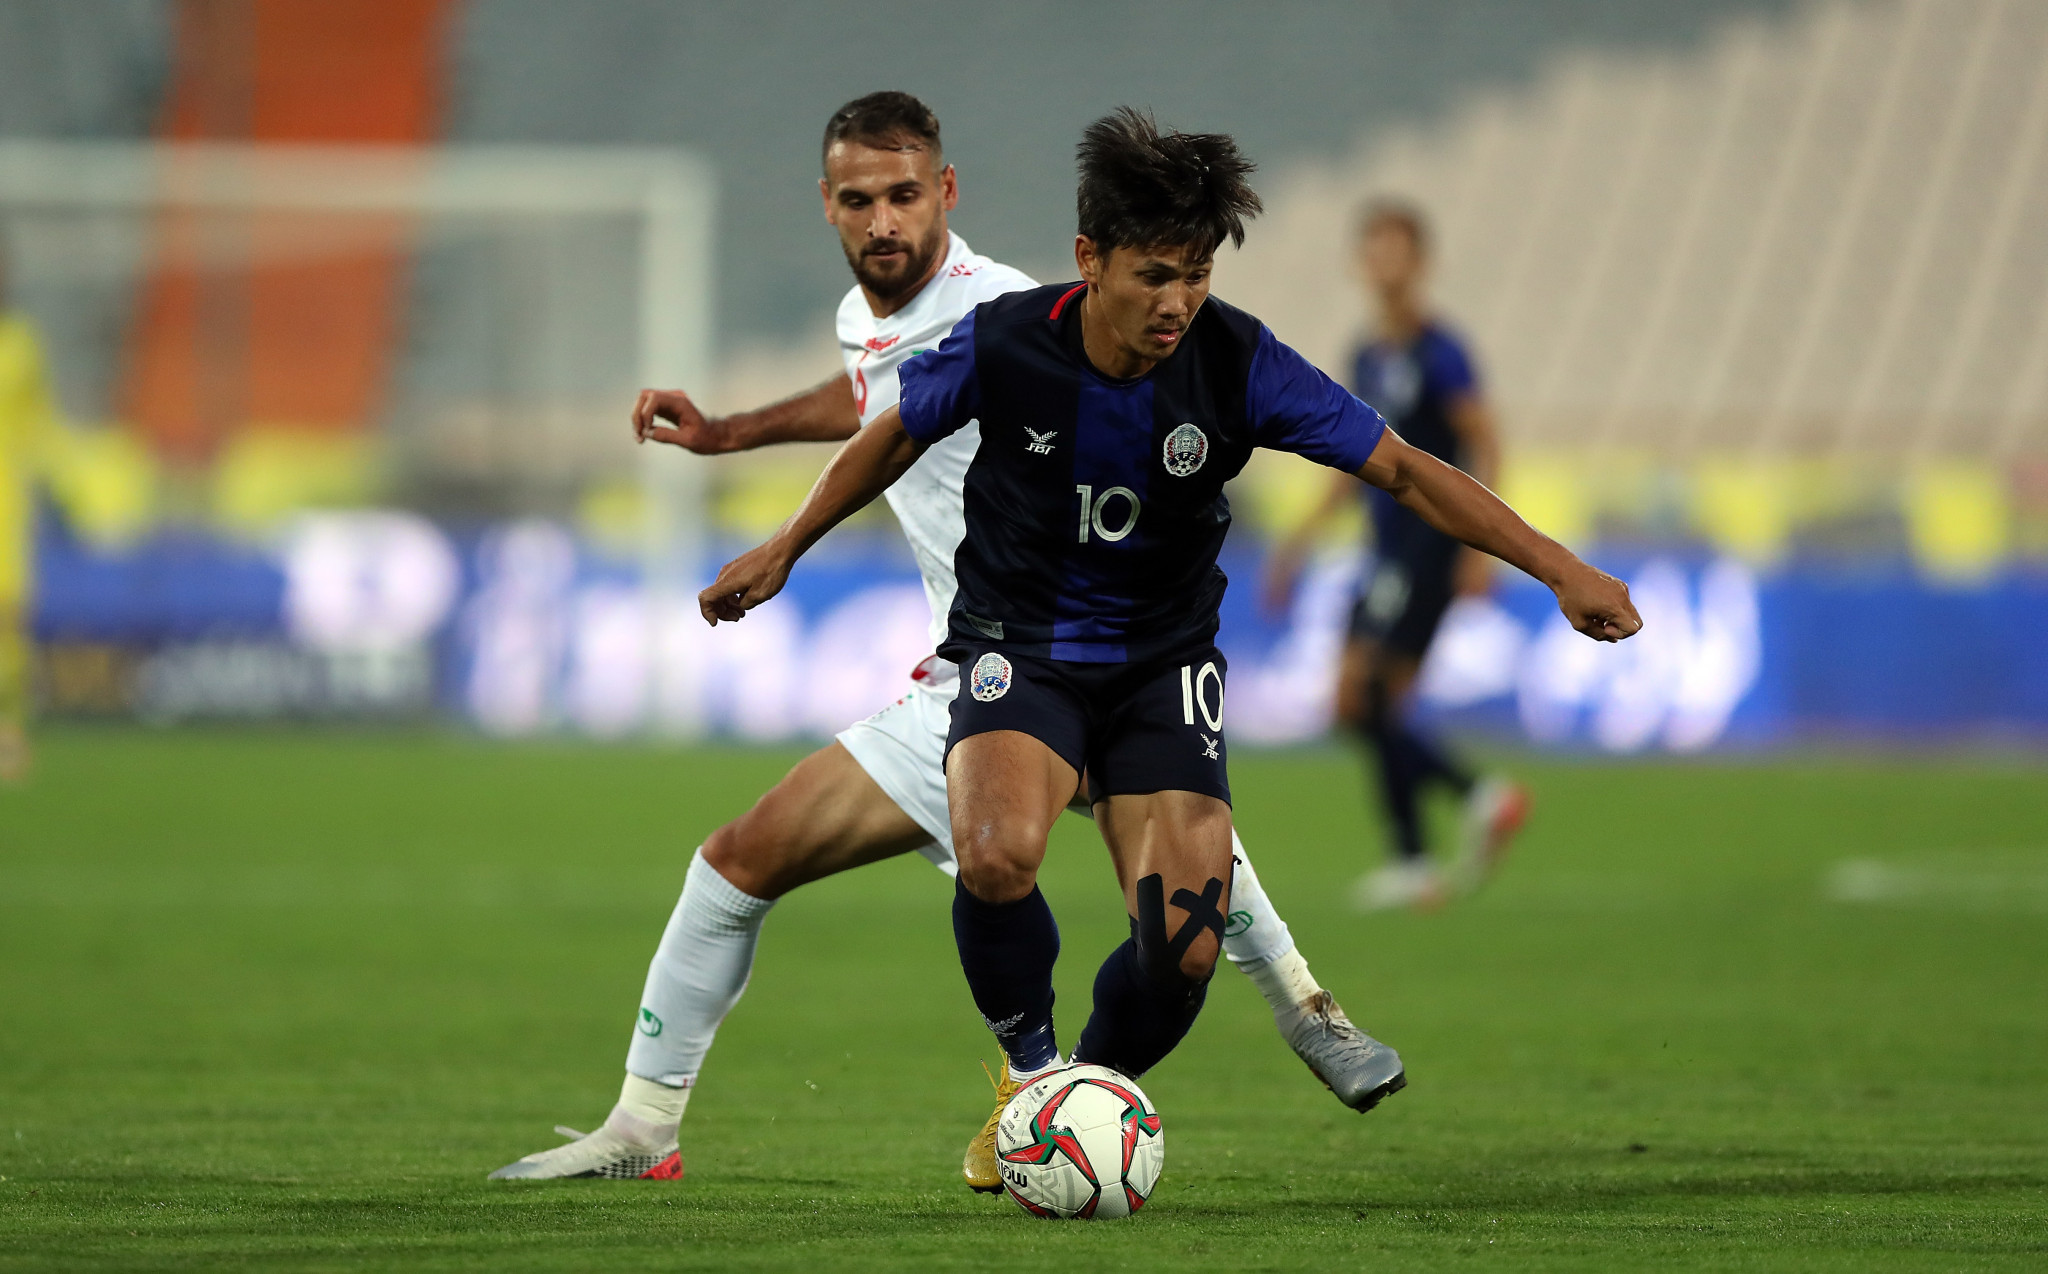 Kouch Sokumpheak plays for Cambodia who were one of the last two teams to secure their places in the final qualifying round for the 2023 AFC Asian Cup ©Getty Images